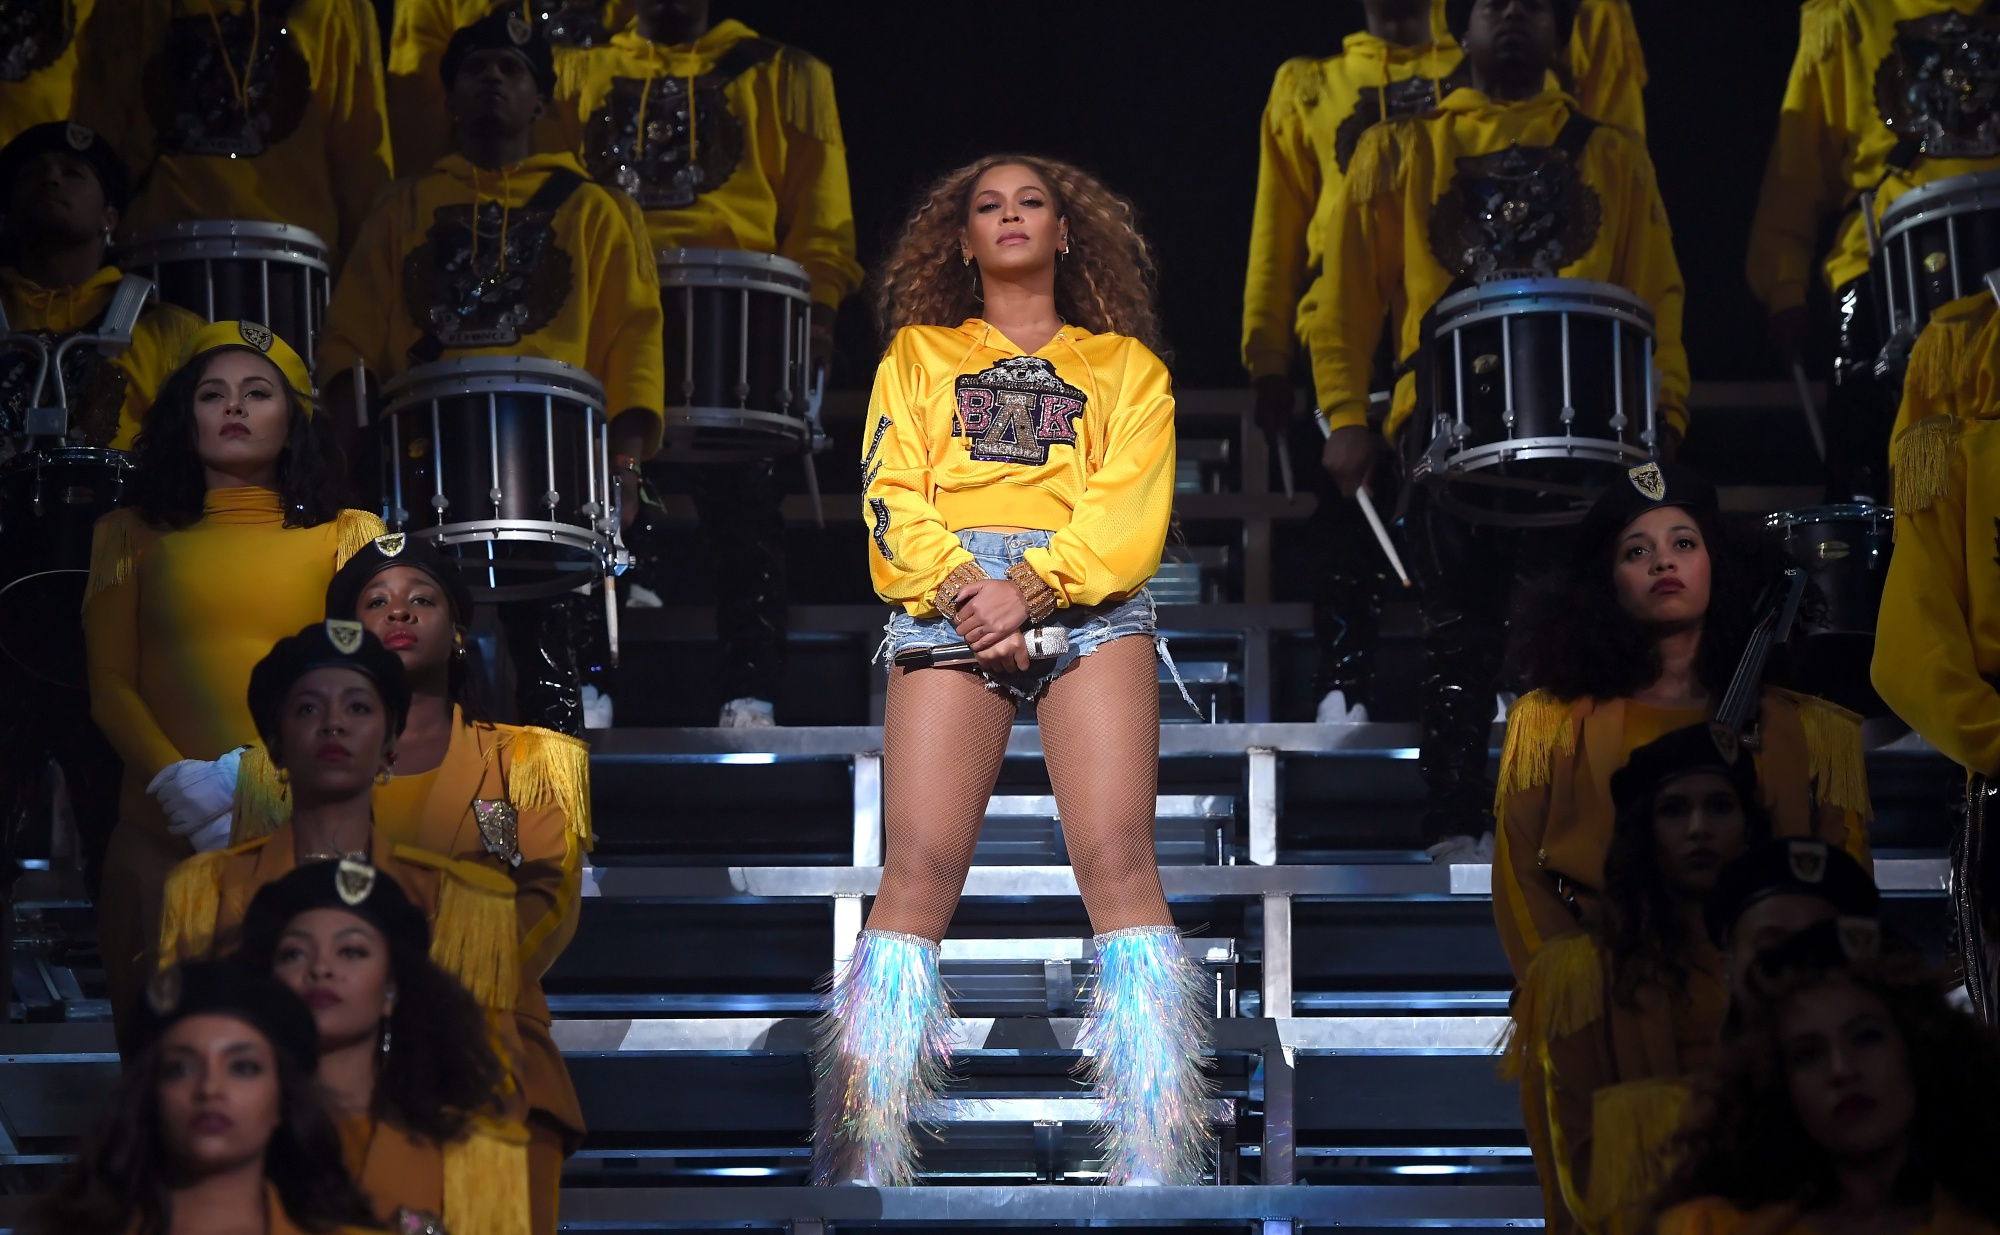 Beyonce Knowles performs onstage during 2018 Coachella Valley Music And Arts Festival in Indio, California, on April 14, 2018.